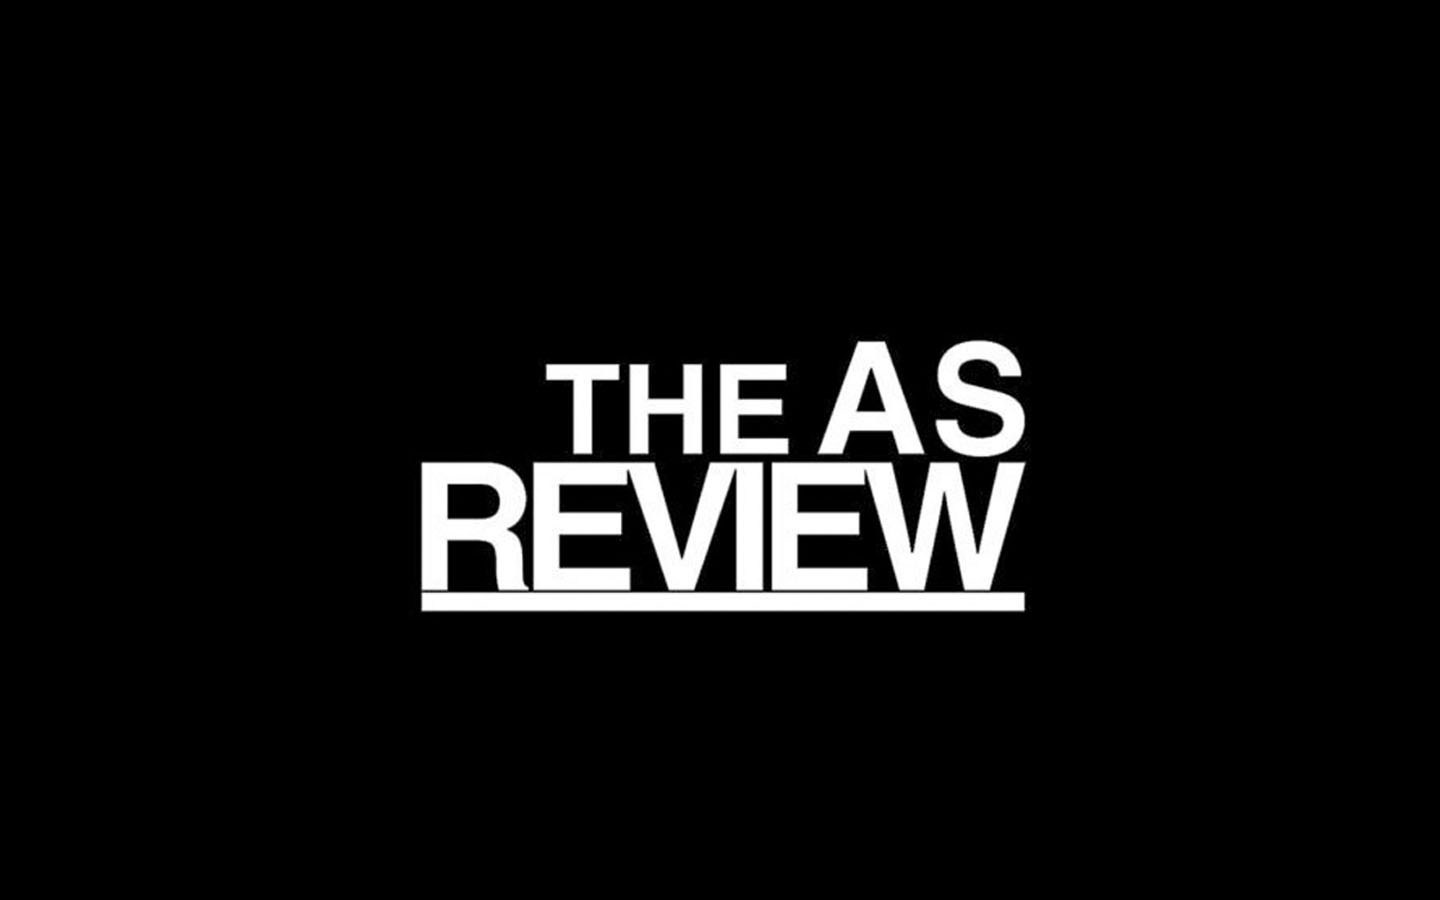 Image of the AS Review logo.